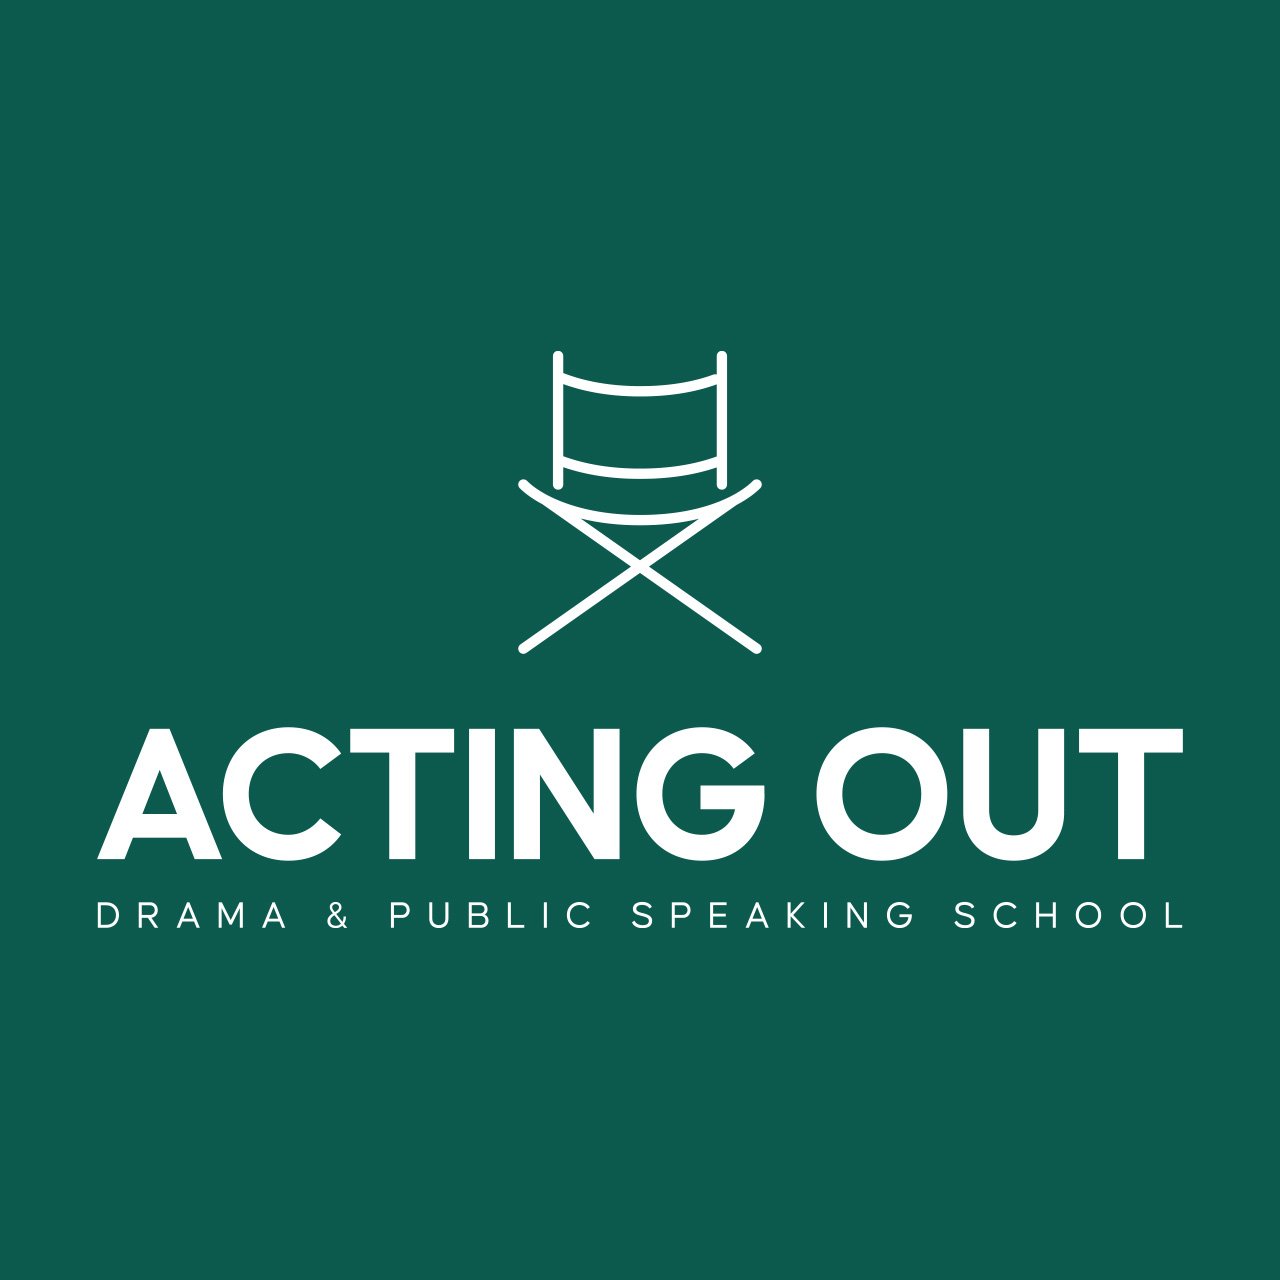 Acting Out Drama School